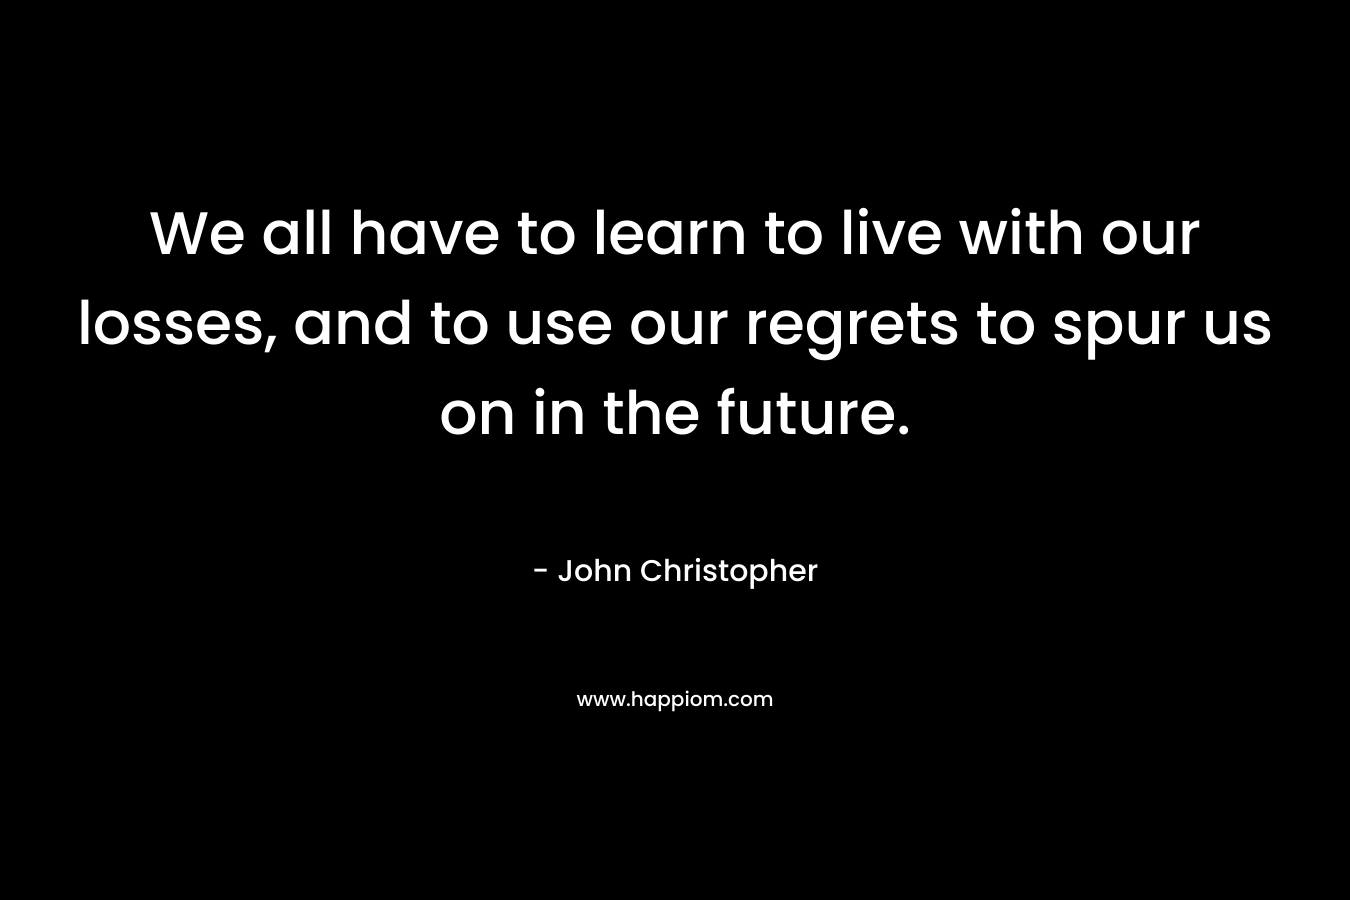 We all have to learn to live with our losses, and to use our regrets to spur us on in the future. – John Christopher